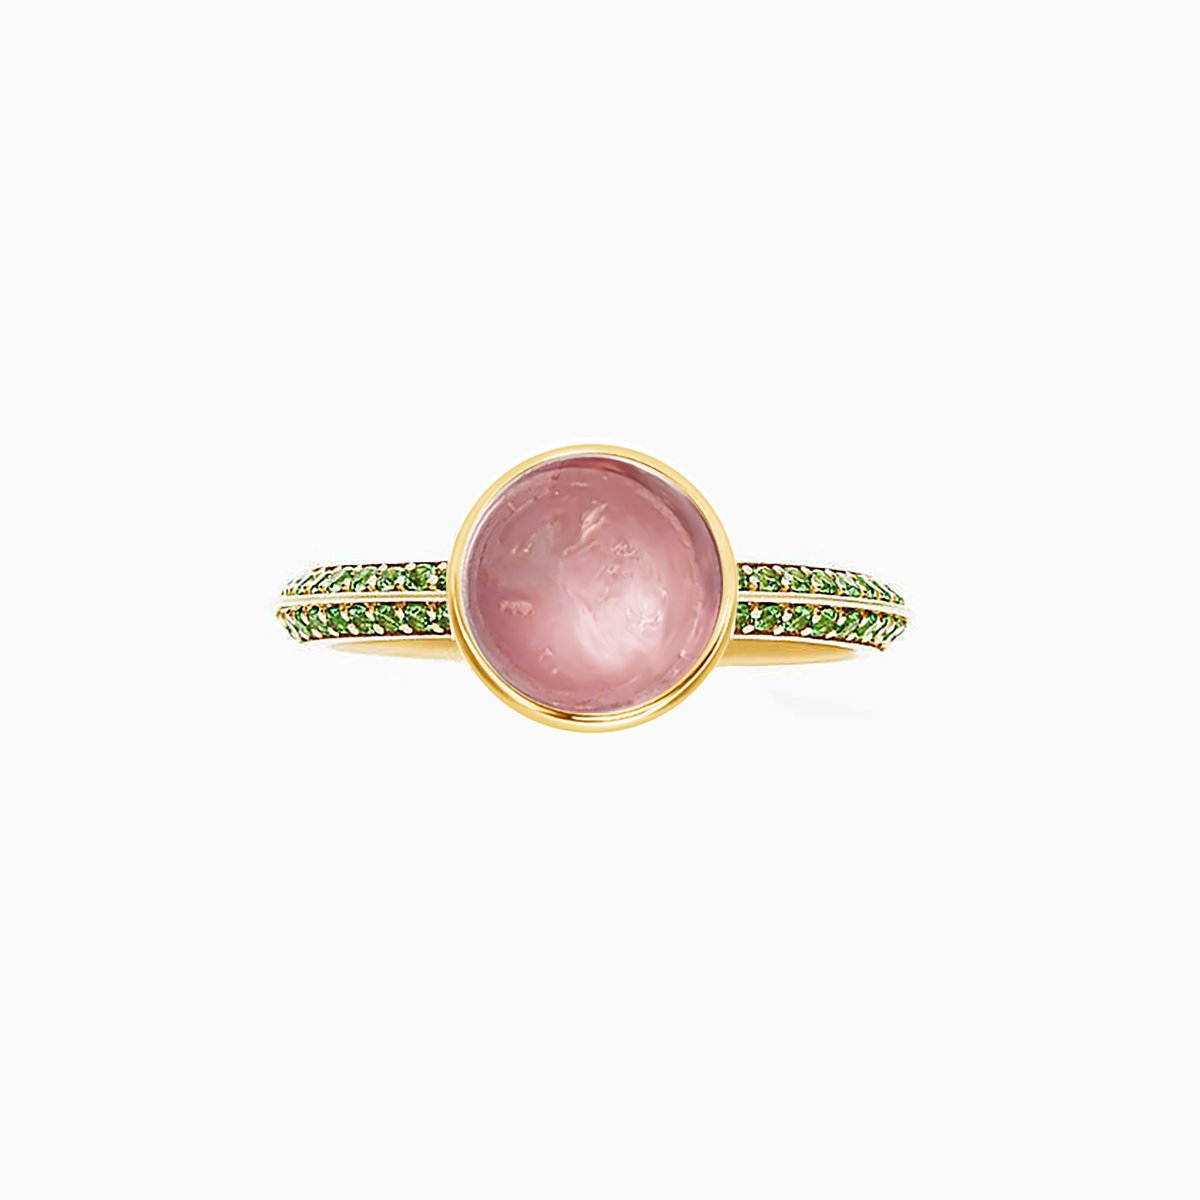 A bold ring for a daring lady. This design mix of cabochon and faceted cut, smooth and sharp lines, truly is an adventurous and unique art piece. 

#Gemstonering, #bezelsetting, #knife-edgeshank

bit.ly/3E3X8sW 

W144 G053 COCO SOLITAIRE GEMSTONE RING - PINK ROUND